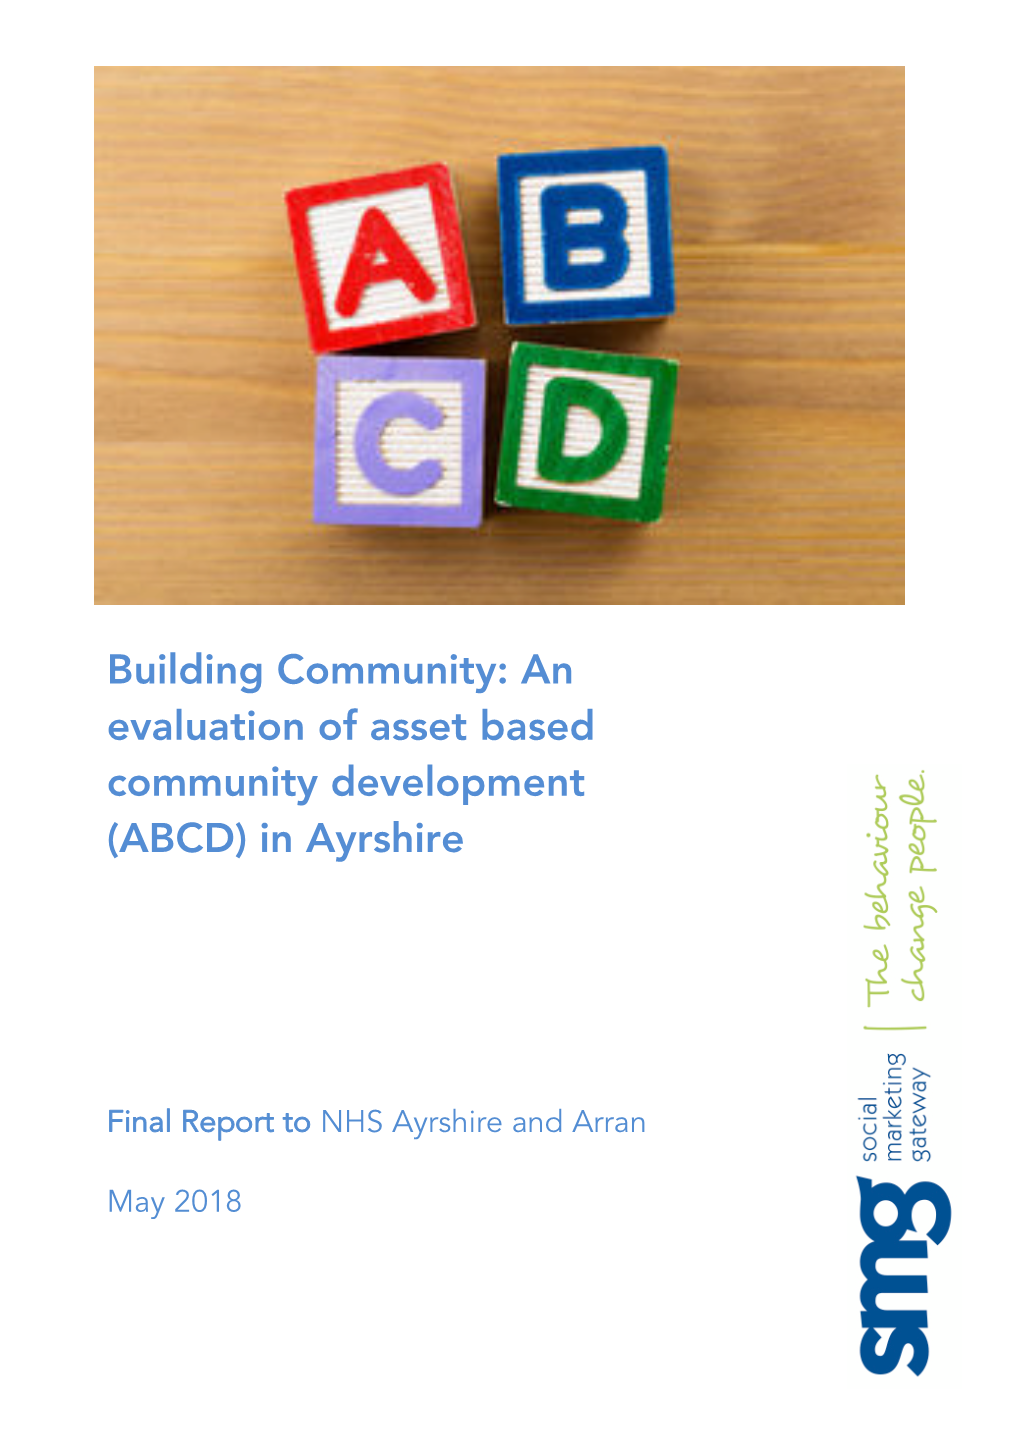 (ABCD) in Ayrshire Final Report To